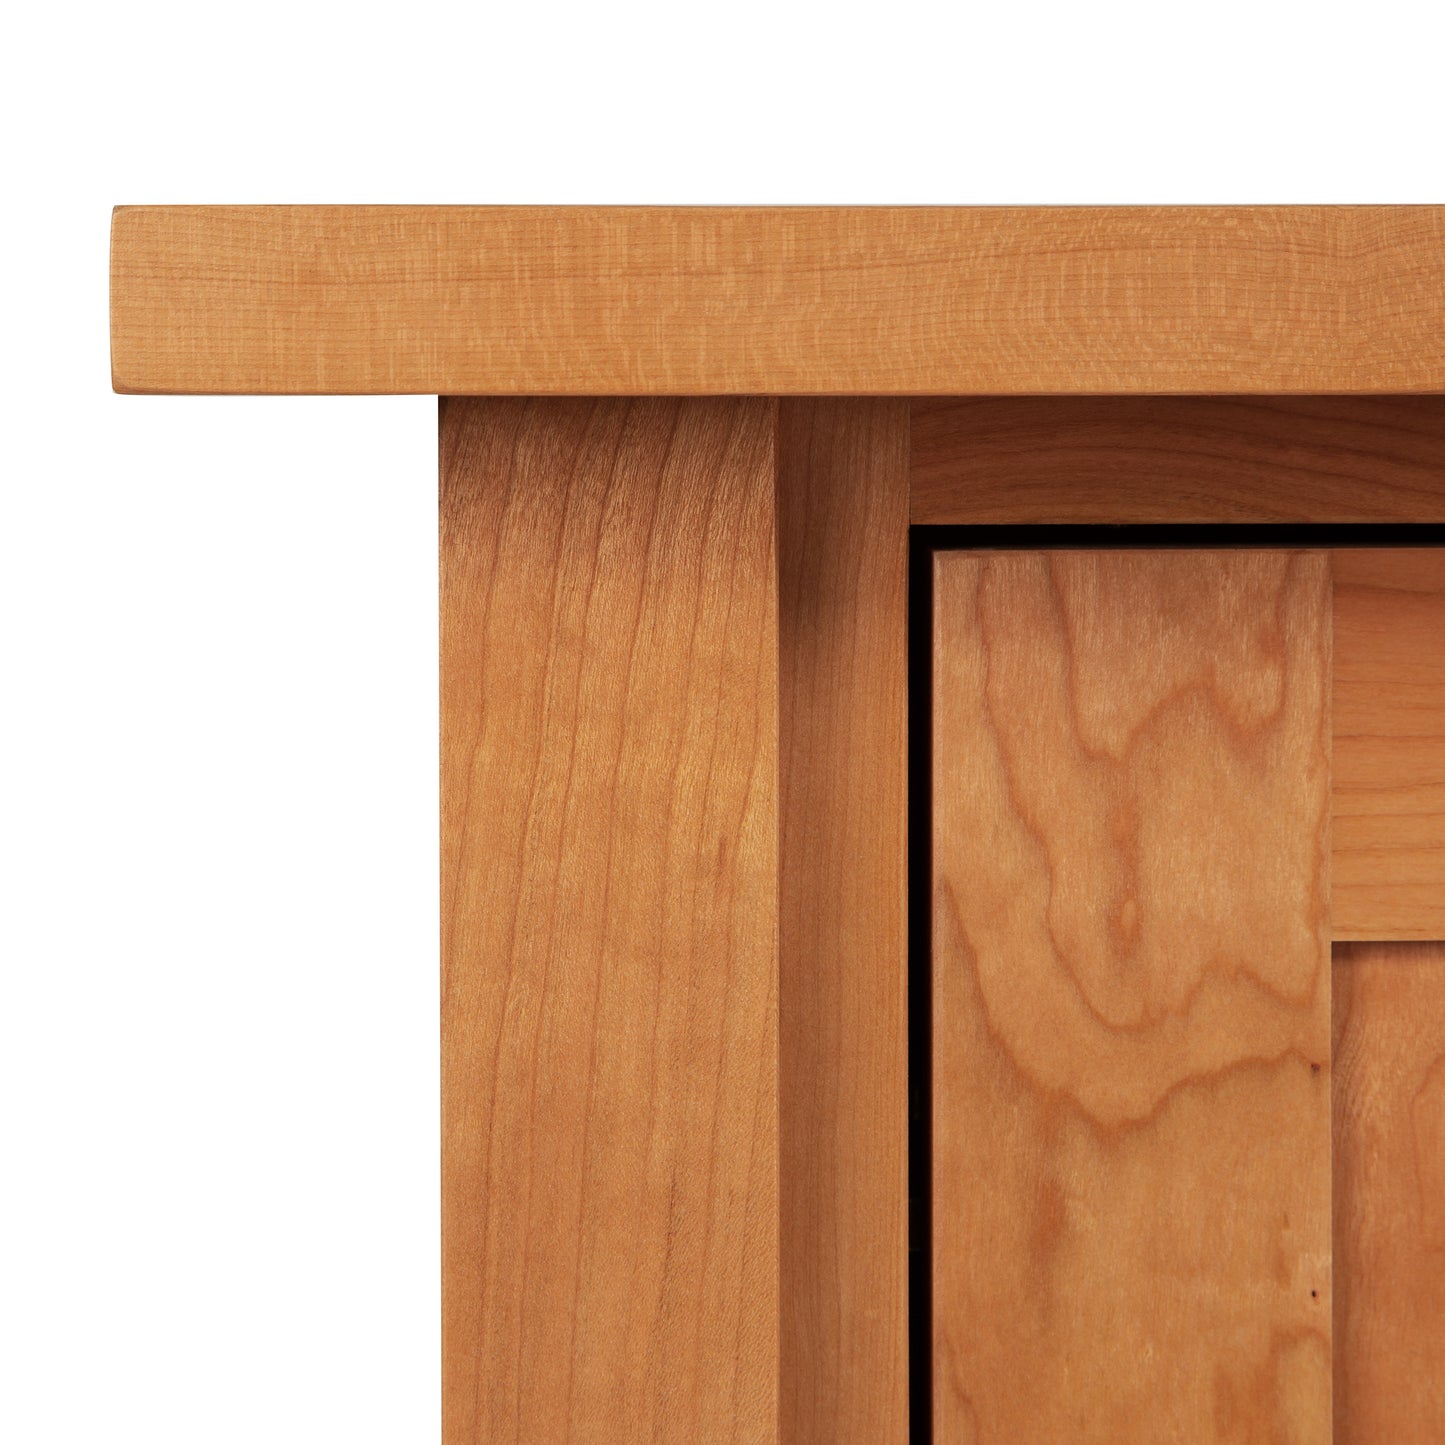 A close up of Lyndon Furniture's Modern Mission Sideboard, a contemporary dining room's handmade wooden door.